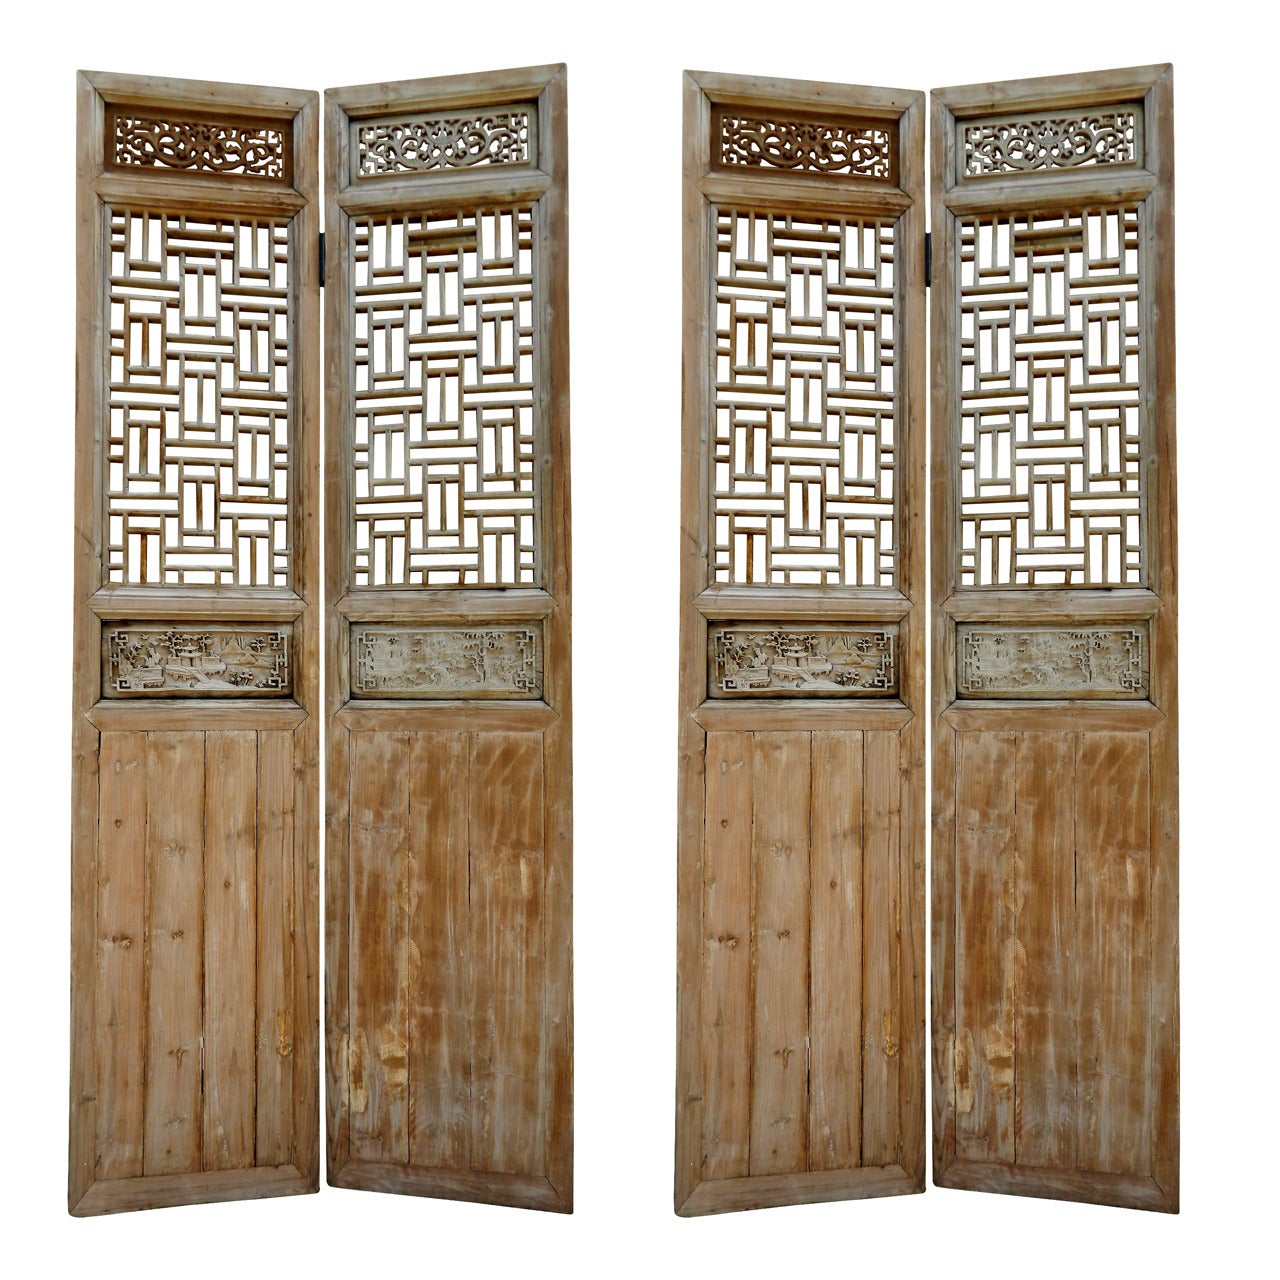 19th Century Large Chinese Four-Panel Wooden Lattice Door or Screen